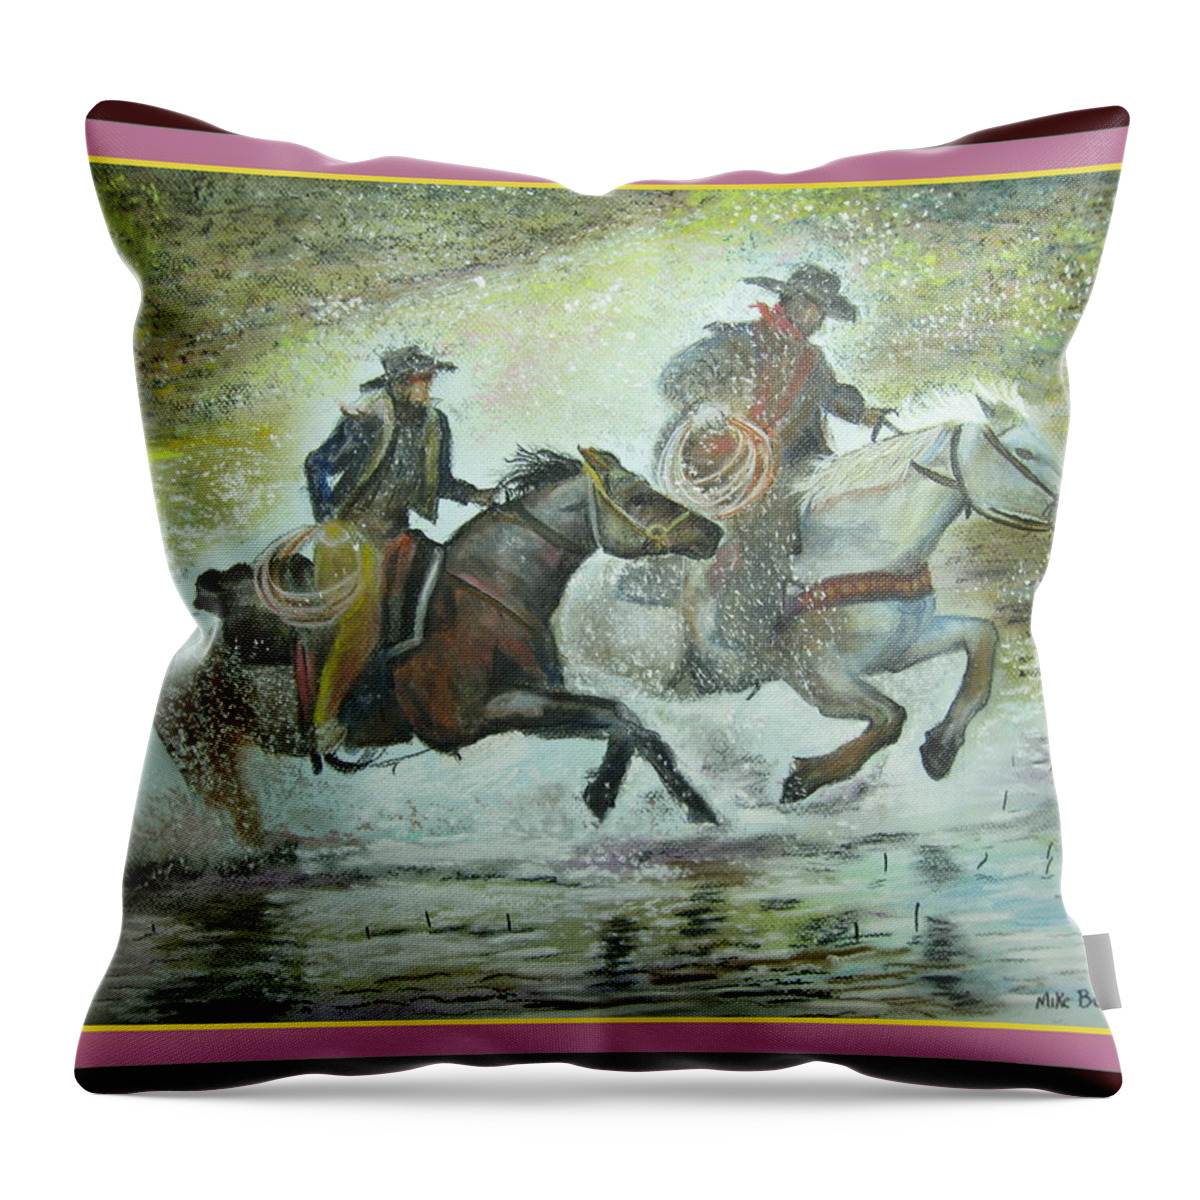 Horses Throw Pillow featuring the painting Racing through the water by Mike Benton